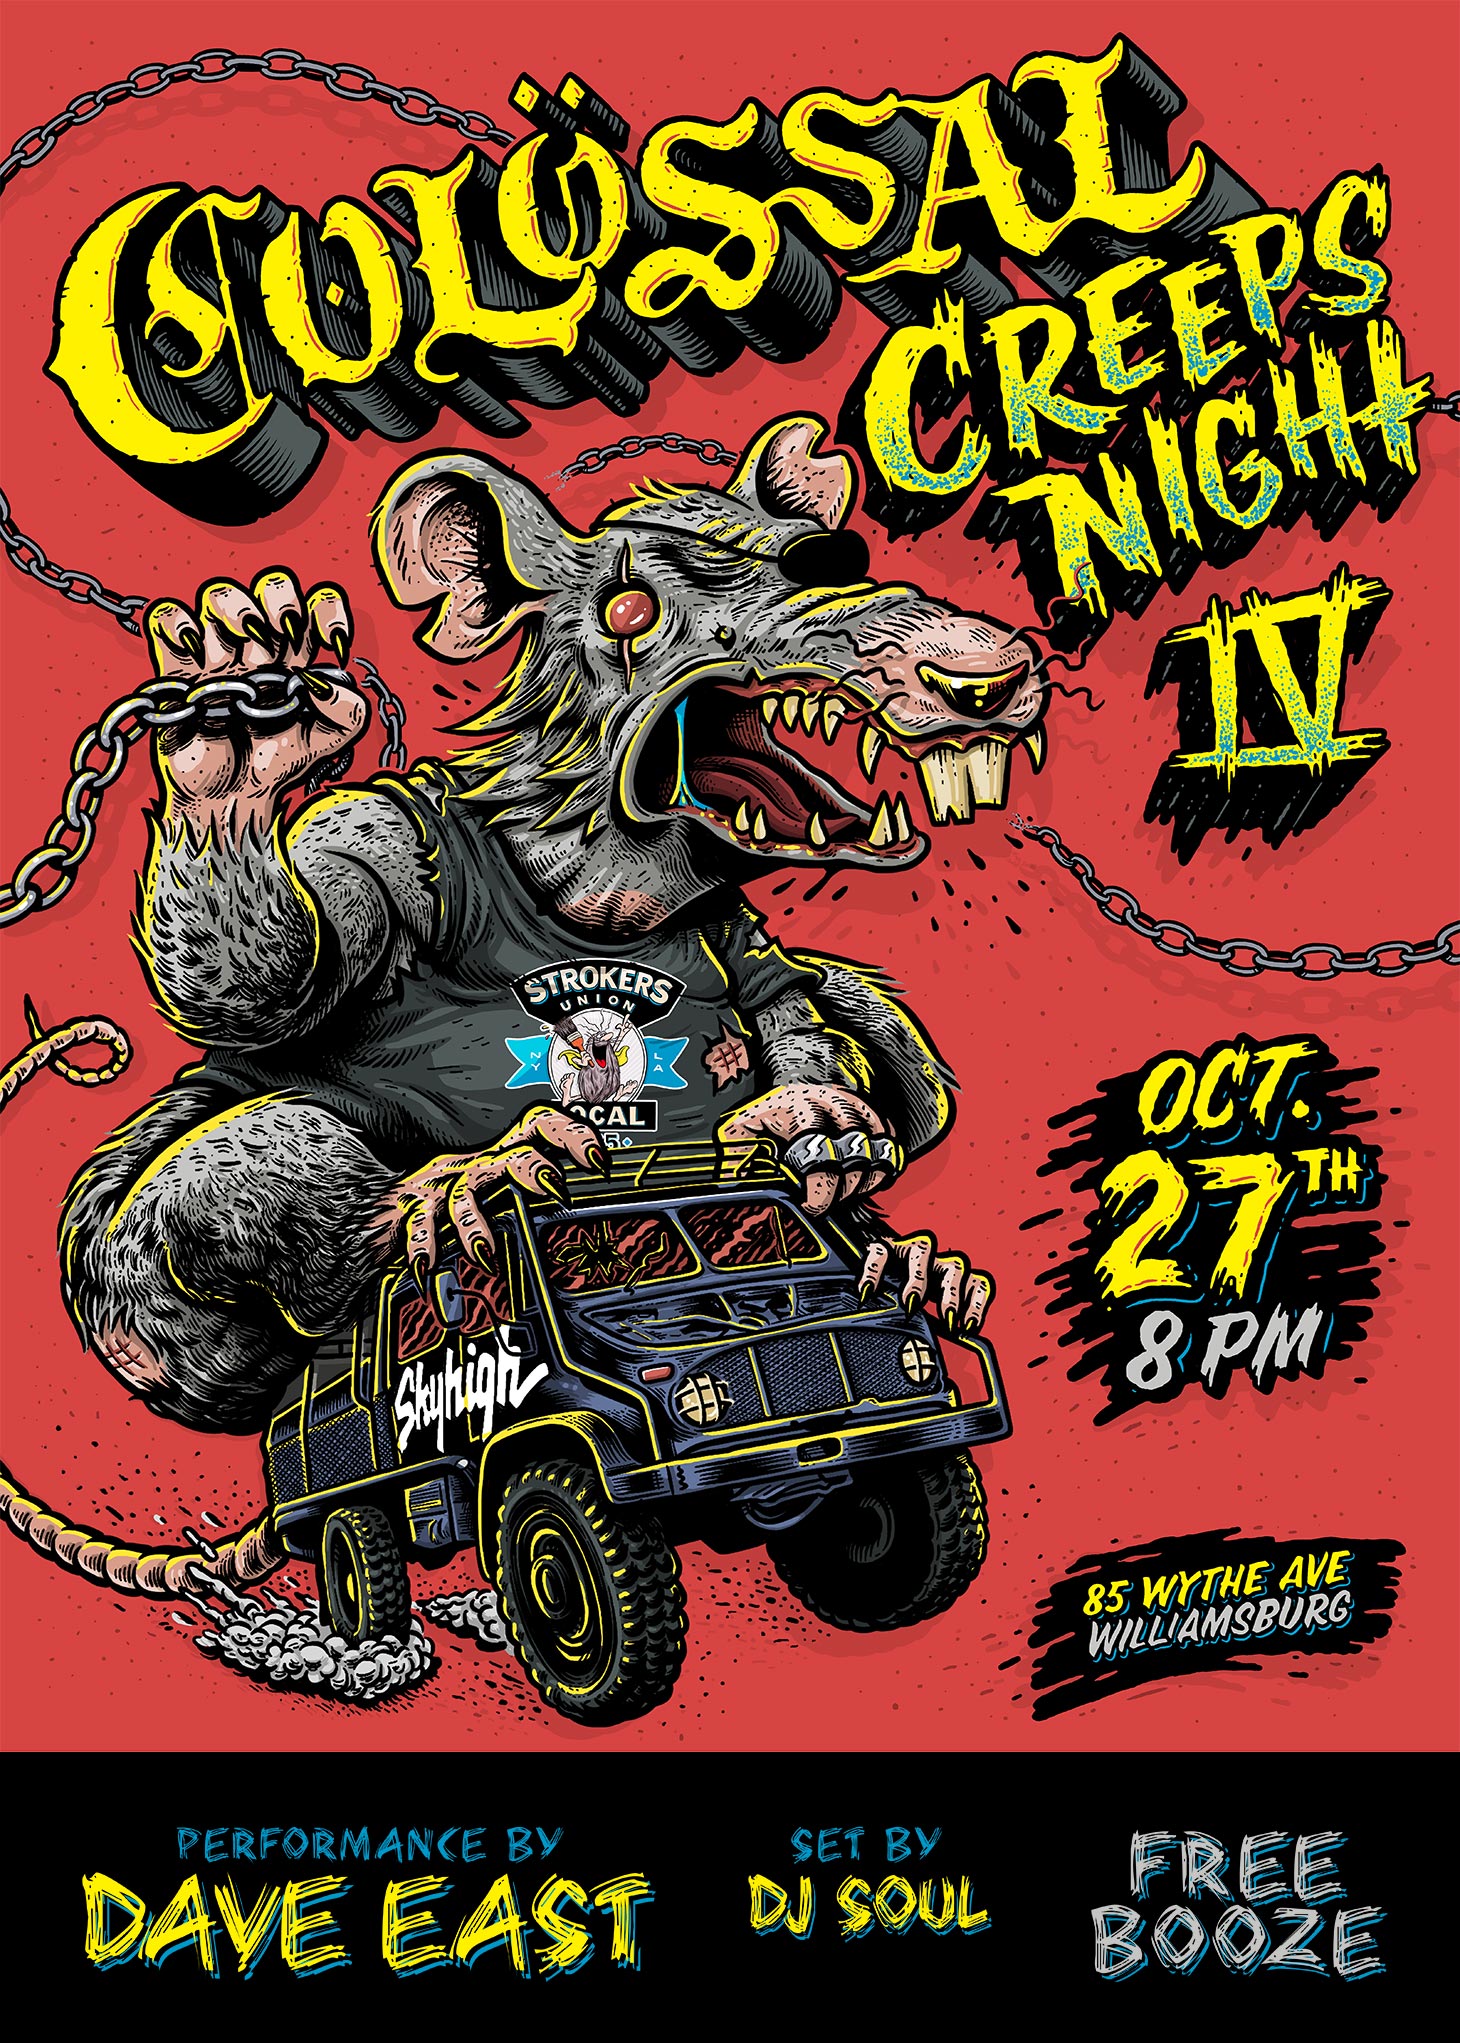 Colossal Creeps Night IV - Halloween Party - October 27, 2017